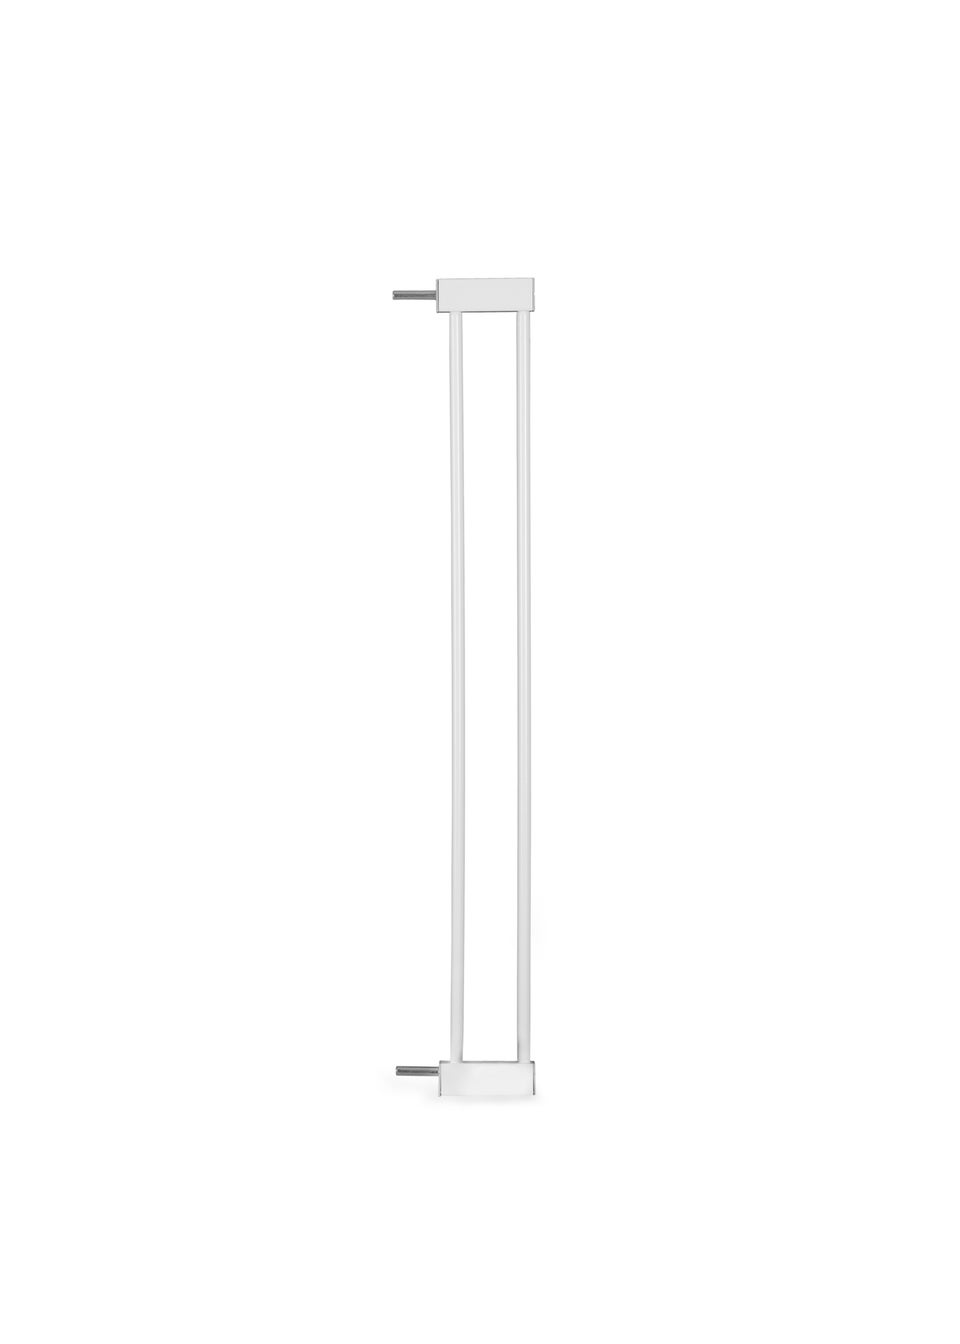 Hauck White Open N Stop Safety Gate (+ 9cm Extension)